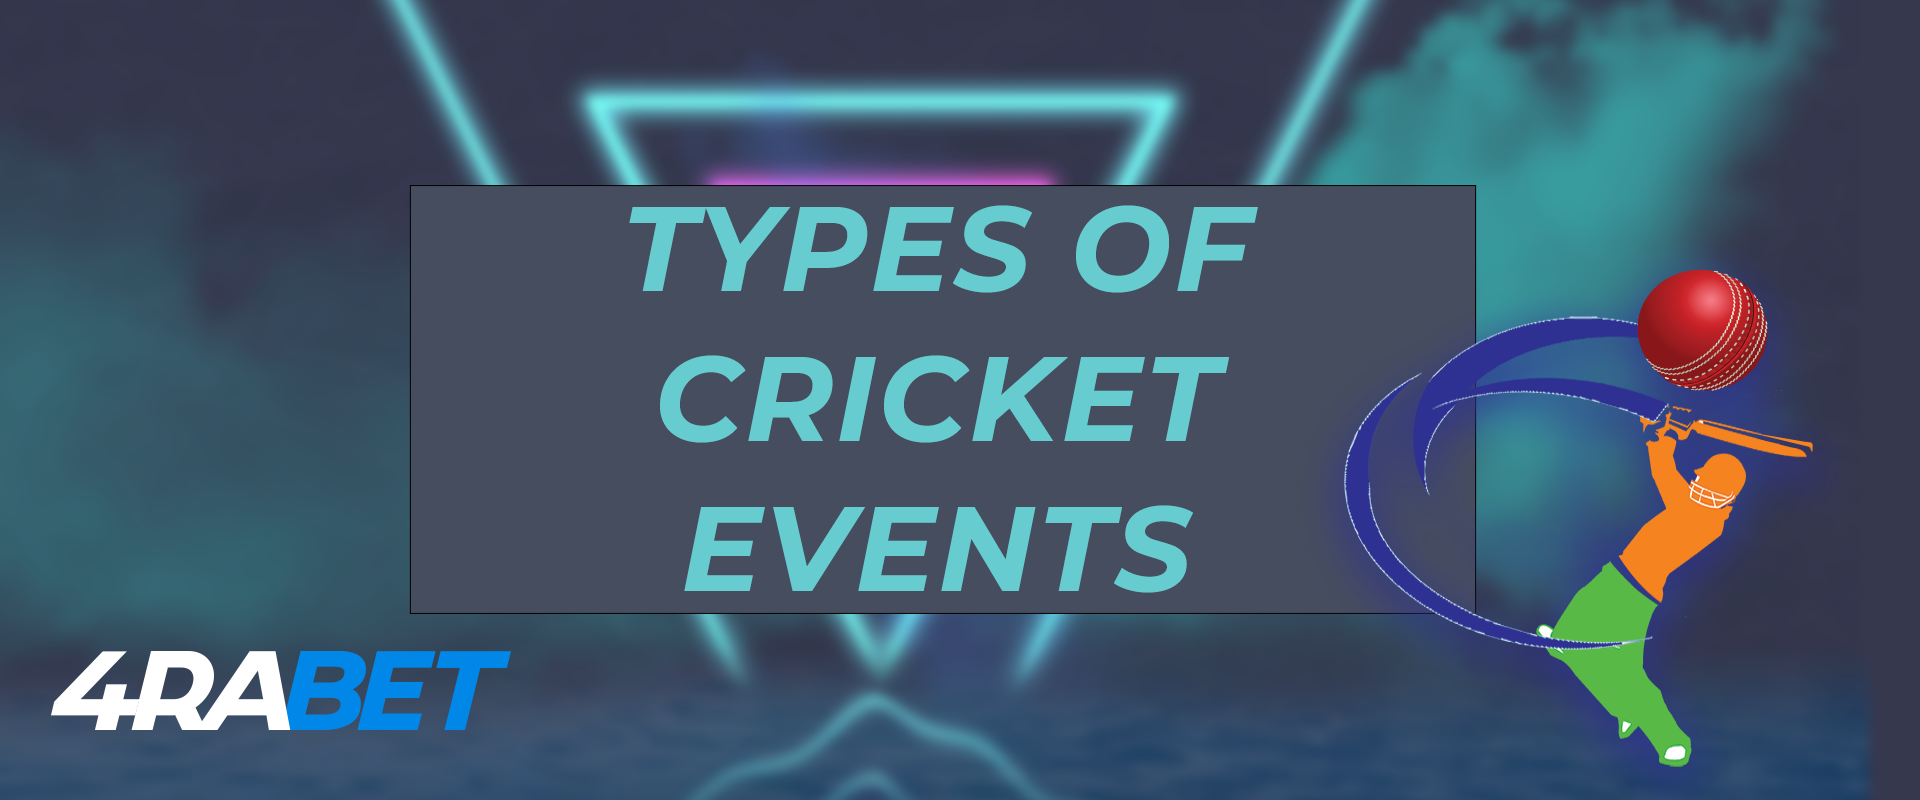 4rabet all types of cricket events.